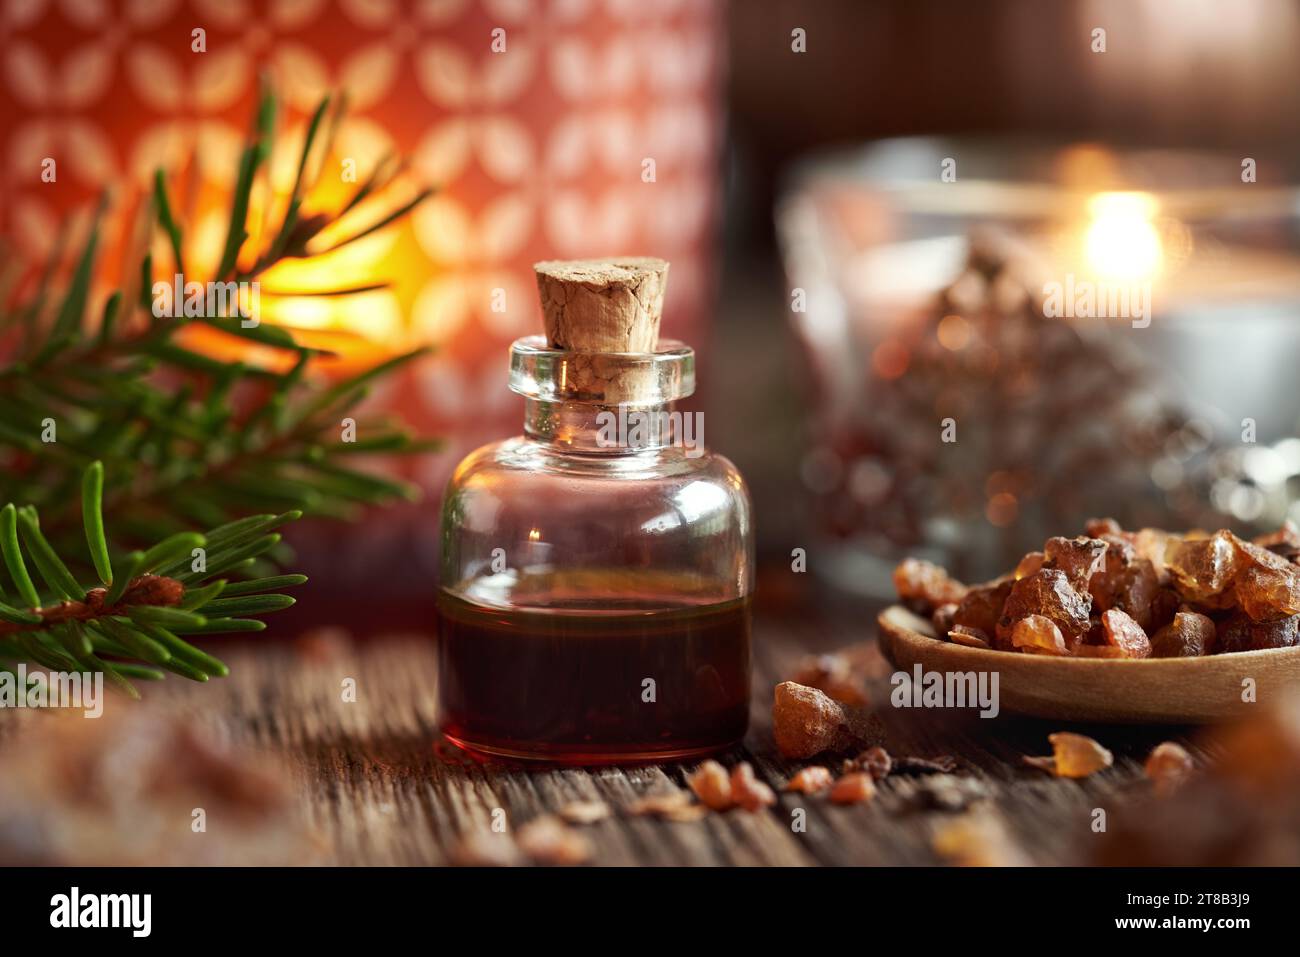 A transparent bottle of myrrh essential oil with spruce branches and candle at Christmas Stock Photo